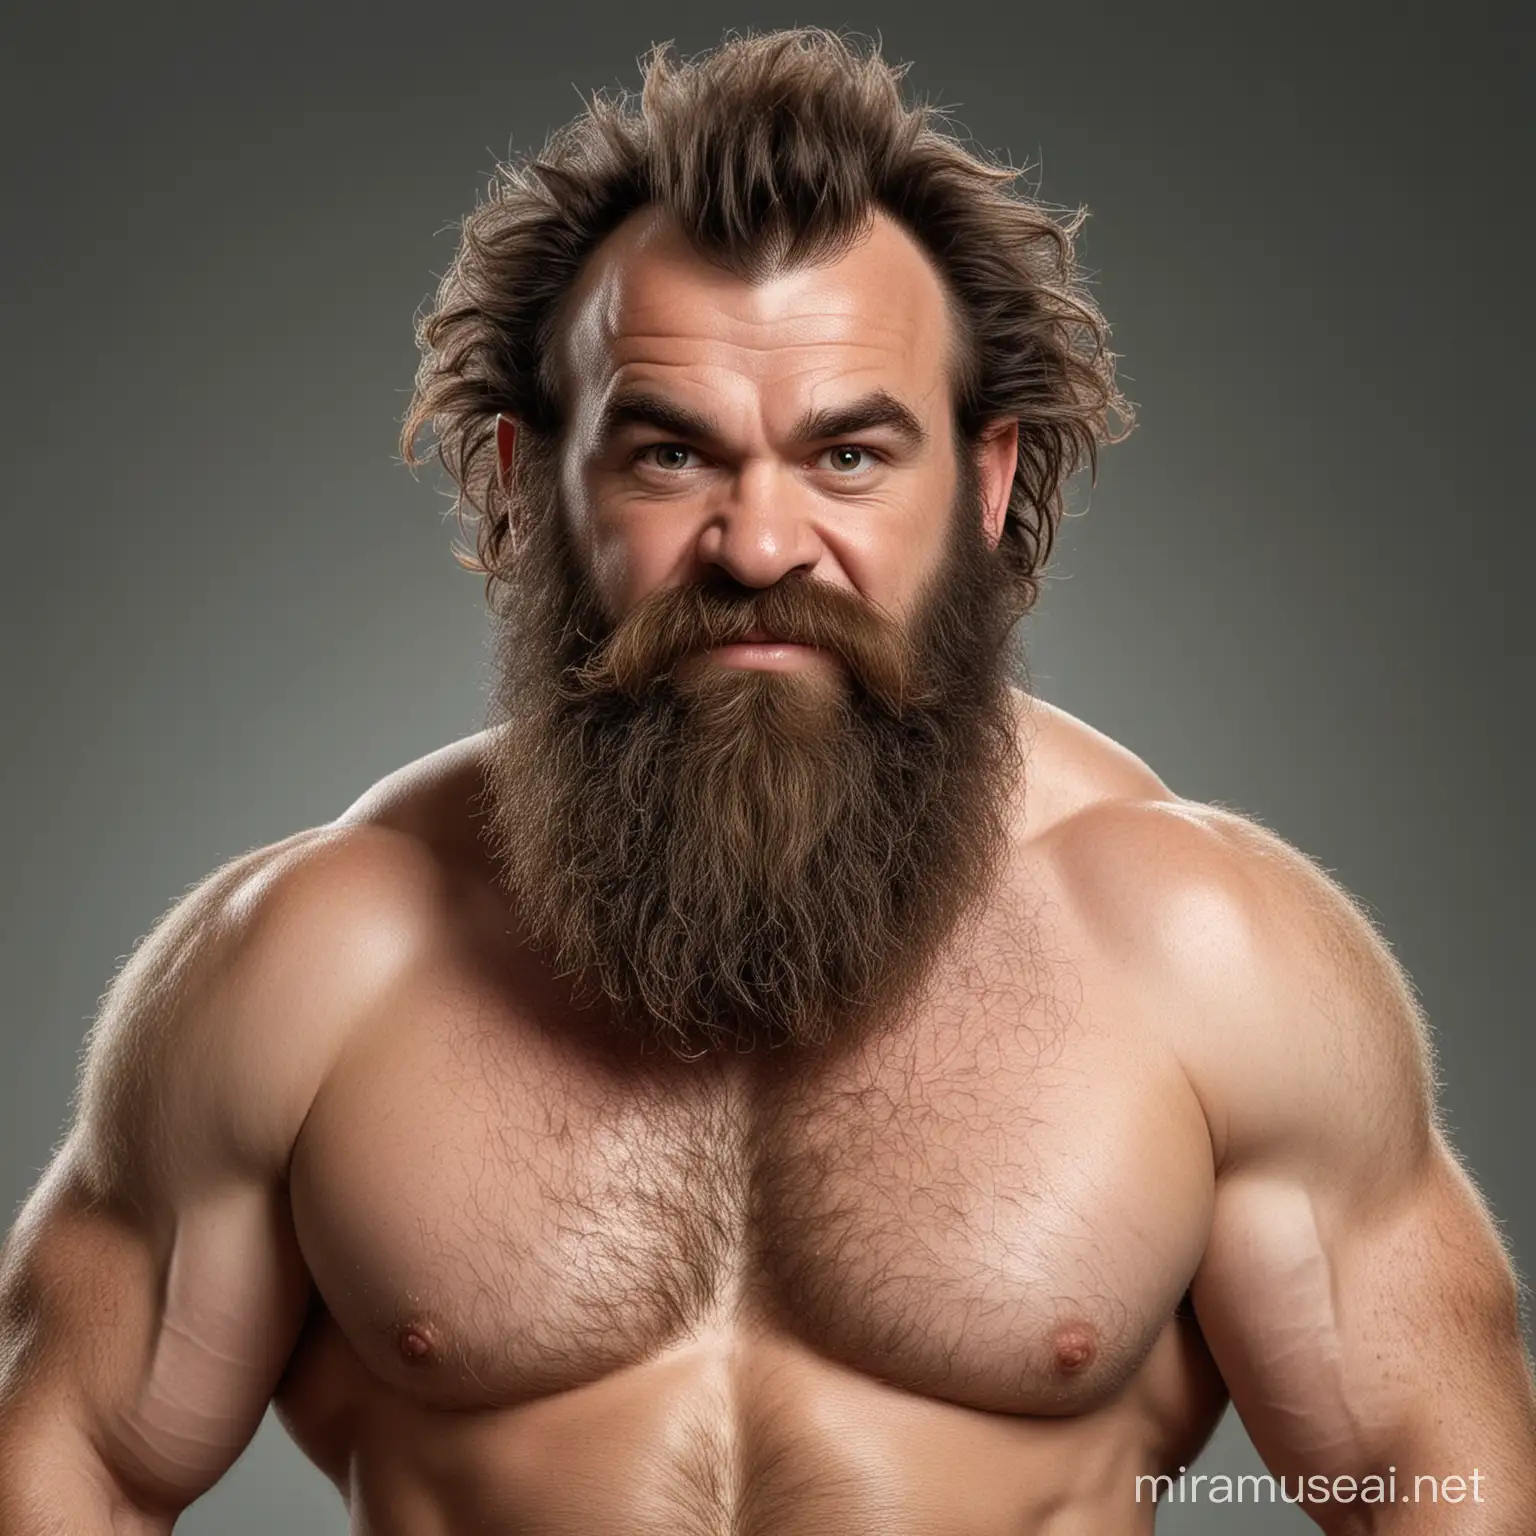 hairy bare armed dwarf with [no beard] extra hairy